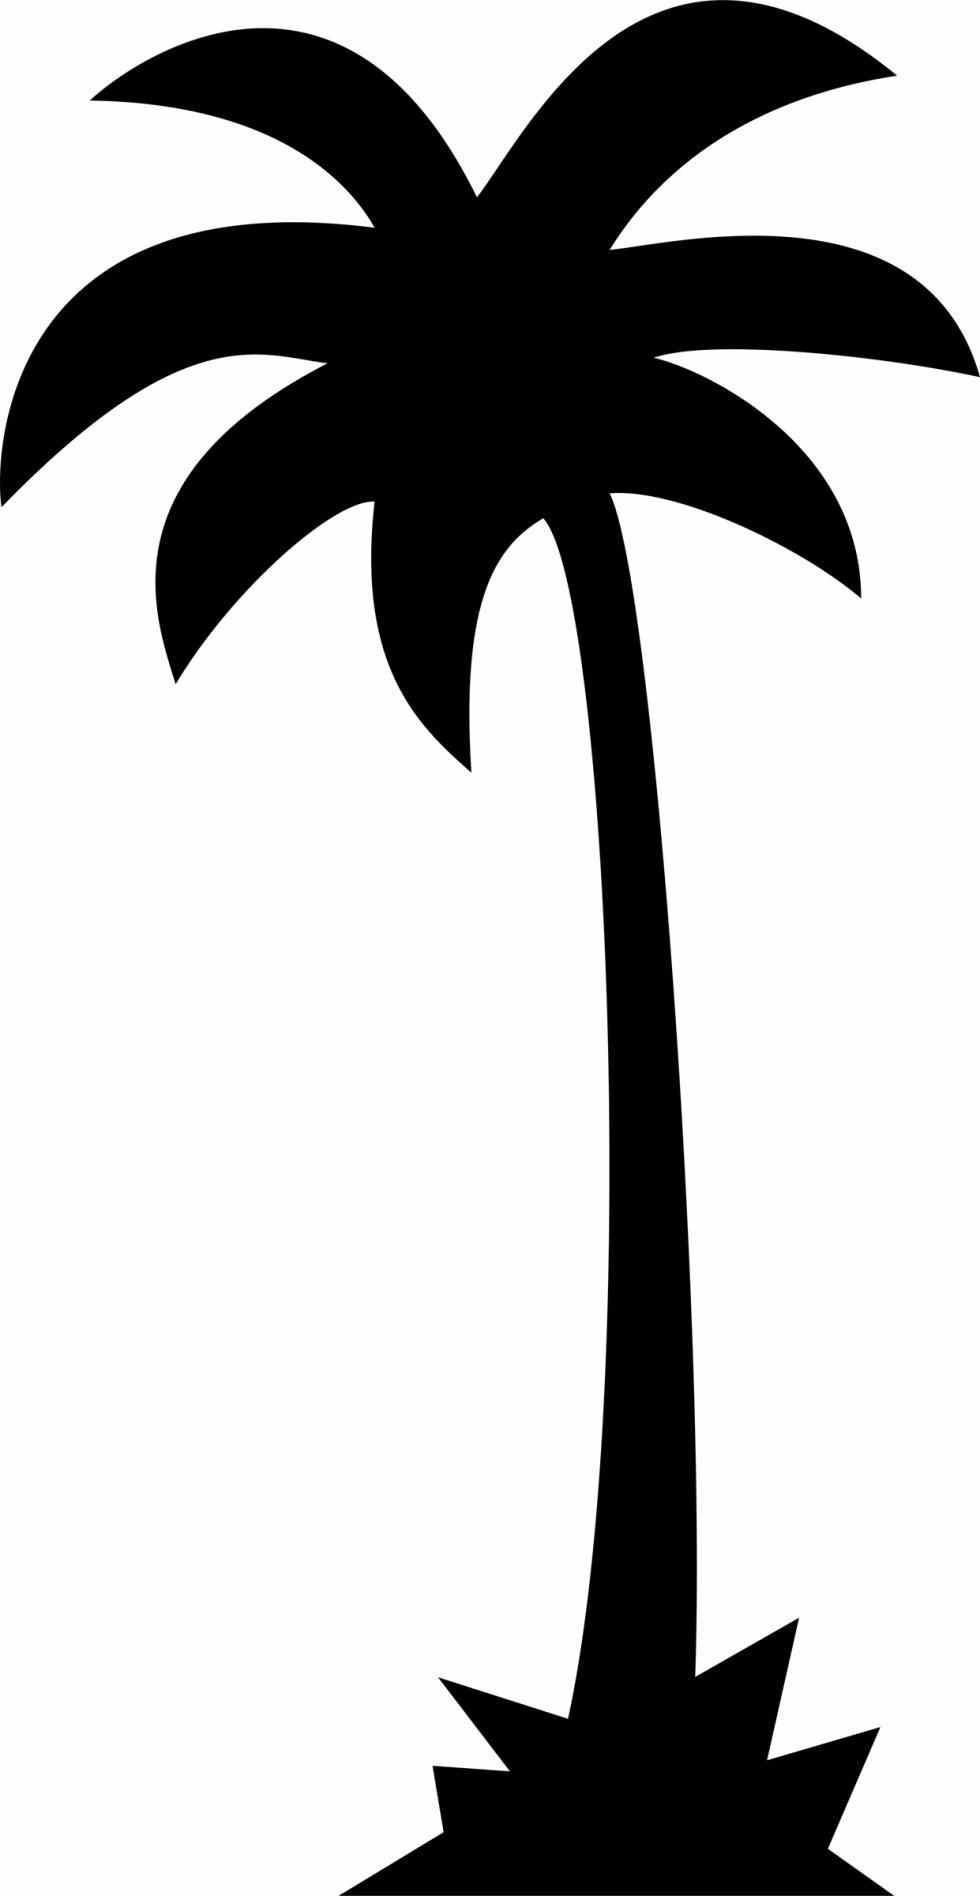 Simple tree clipart.